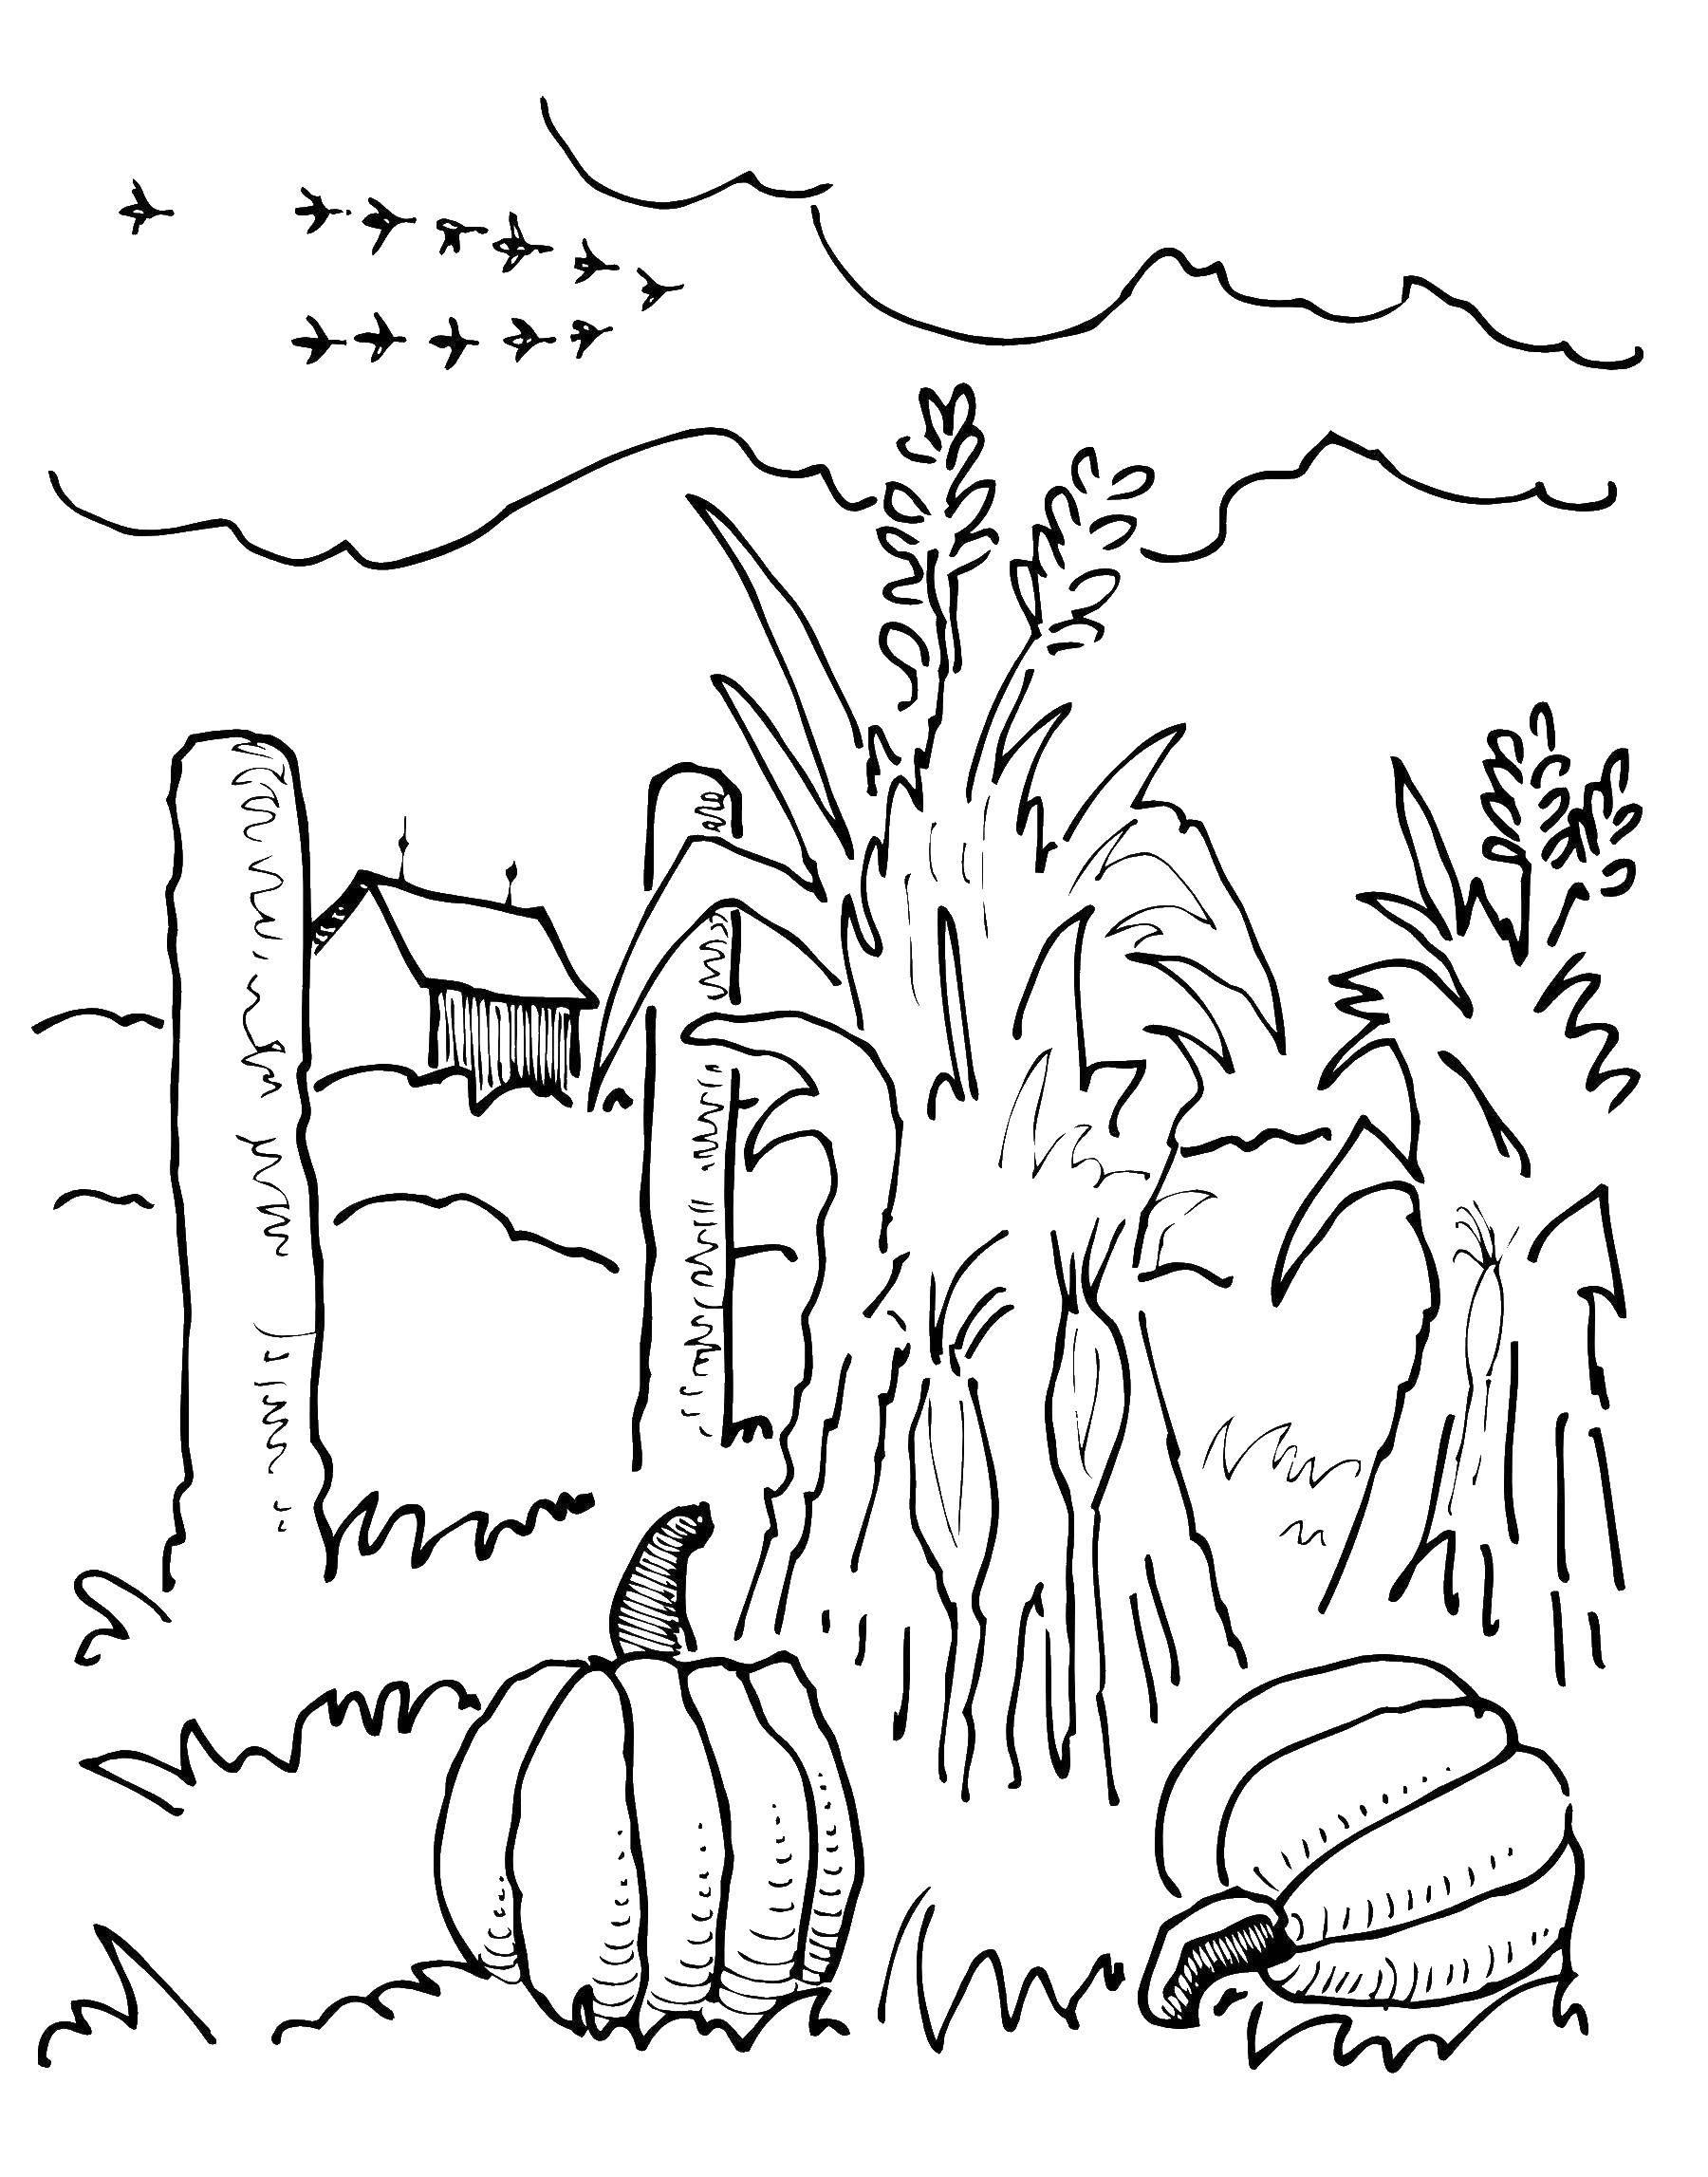 Coloring Pumpkins in the garden. Category vegetable garden. Tags:  vegetable garden, vegetables, animals.